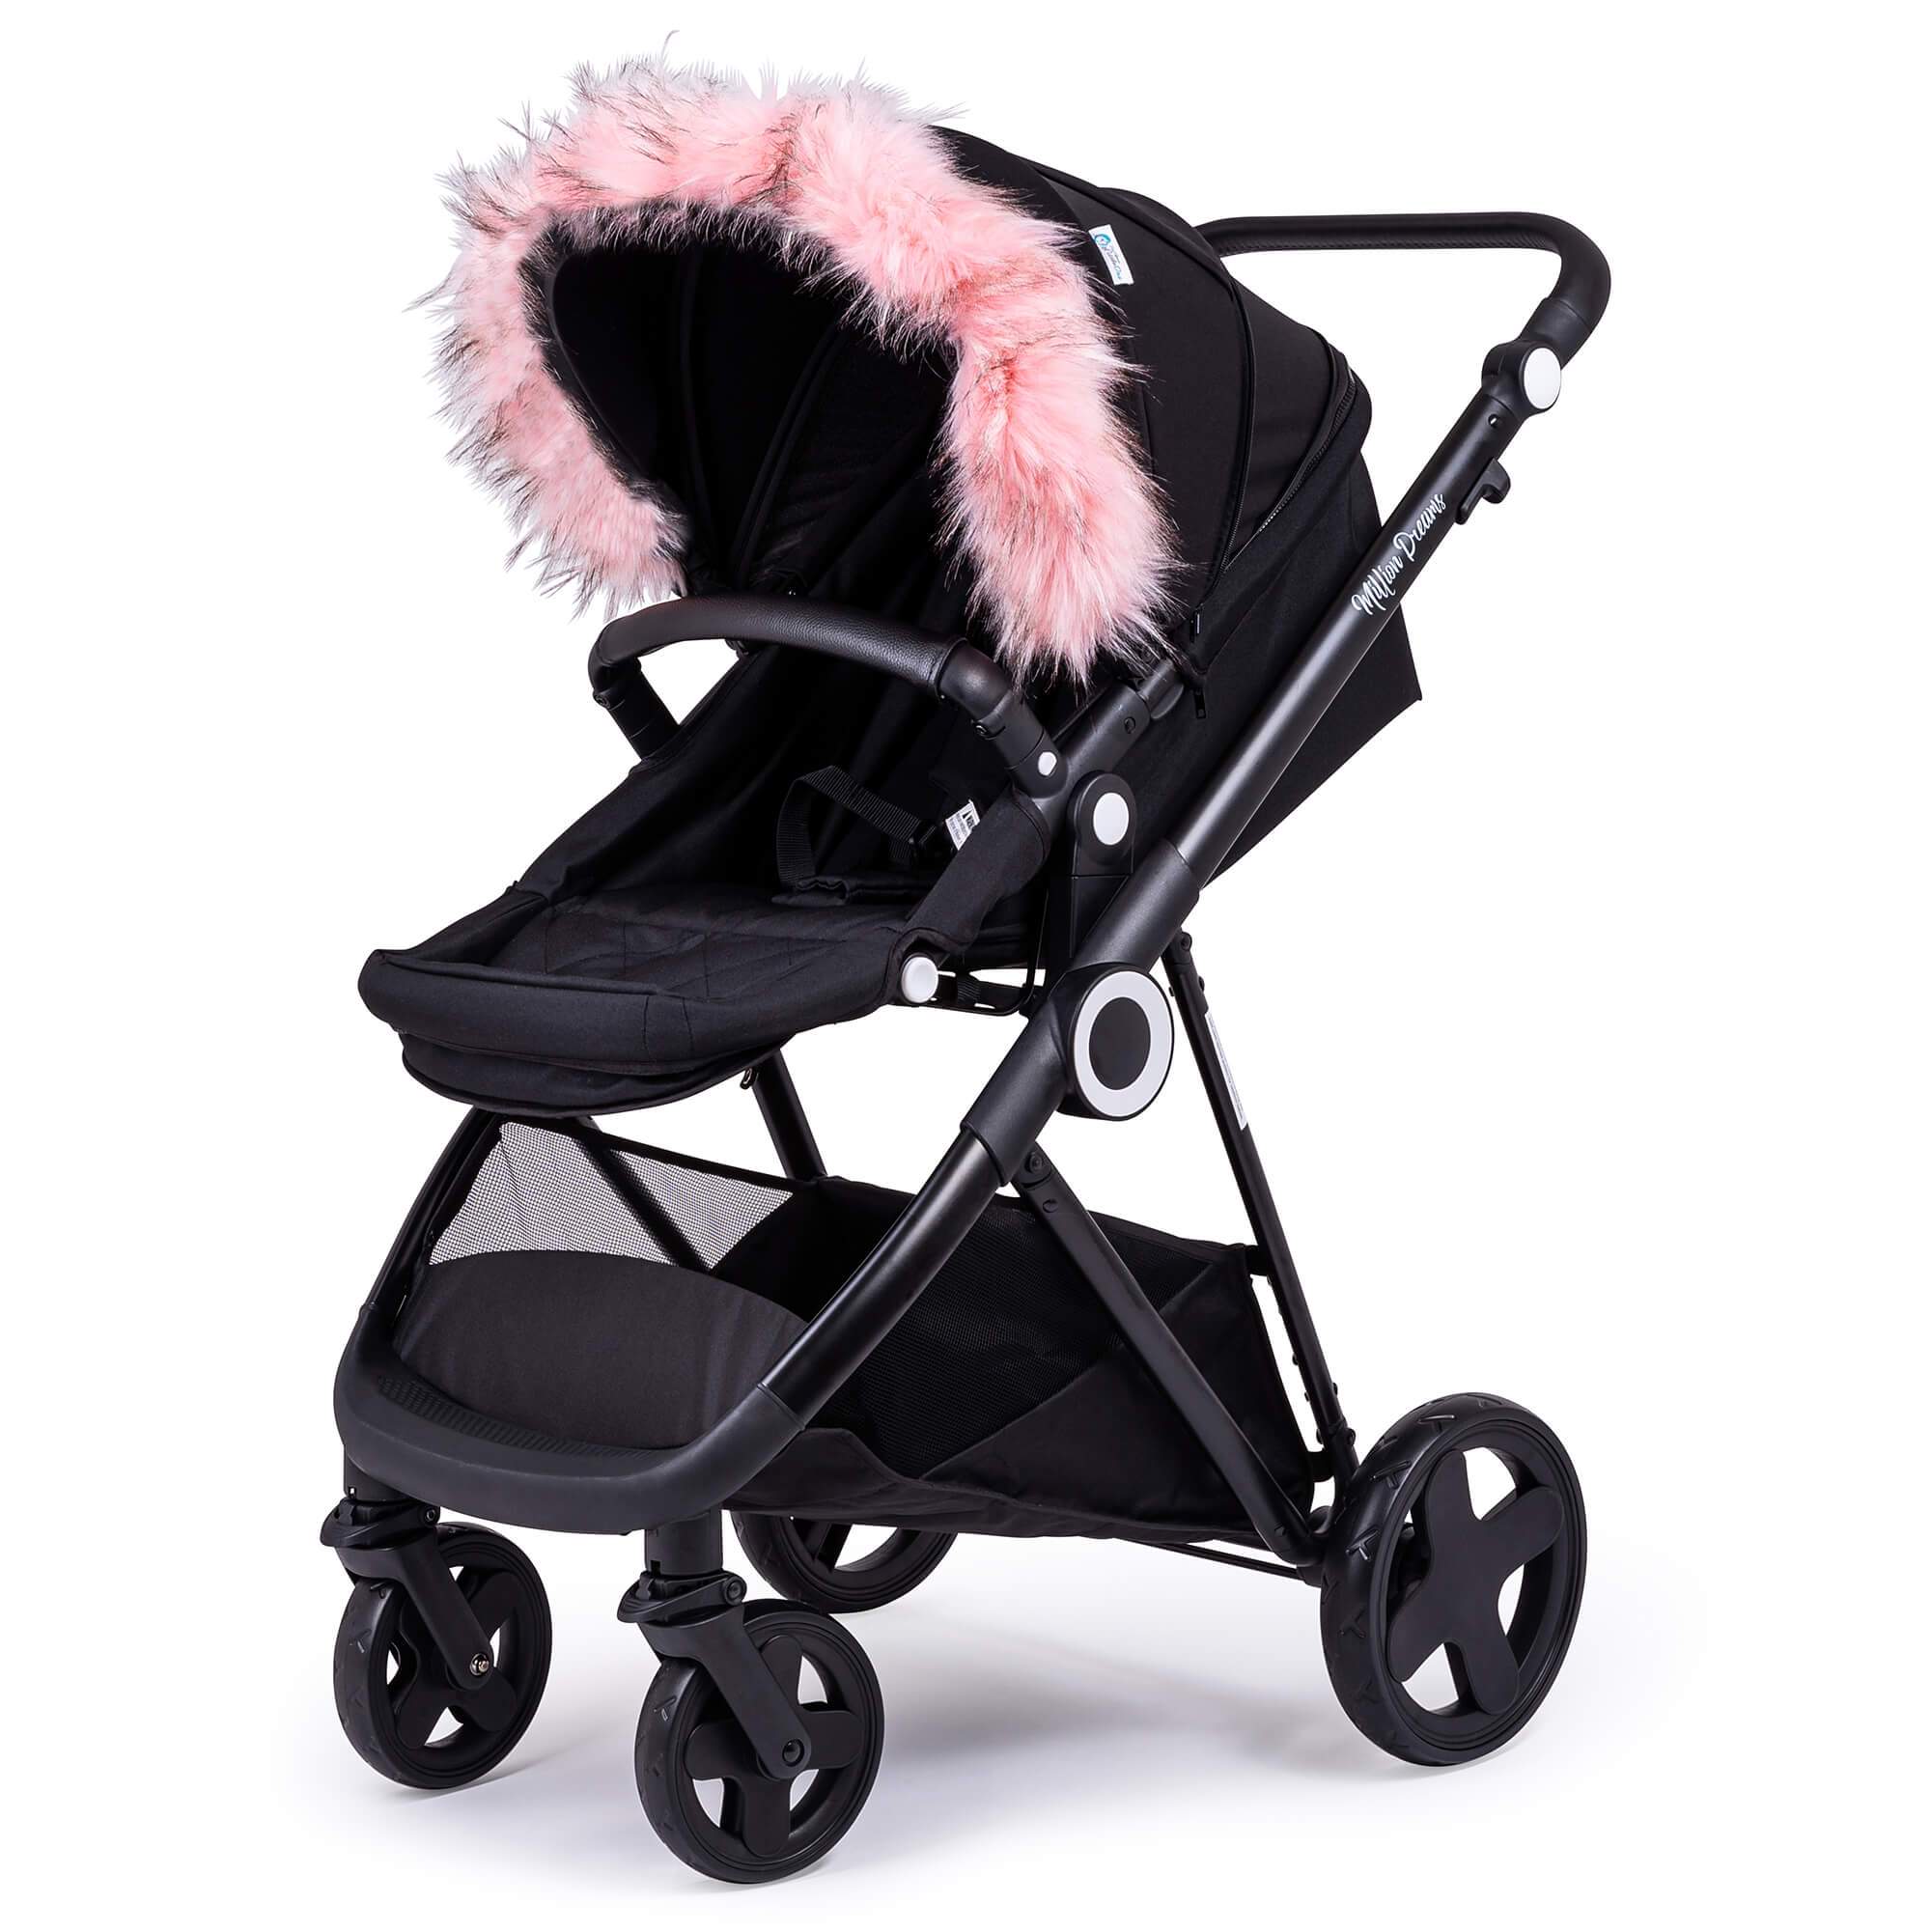 Pram Fur Hood Trim Attachment for Pushchair Compatible with Concord - Light Pink / Fits All Models | For Your Little One